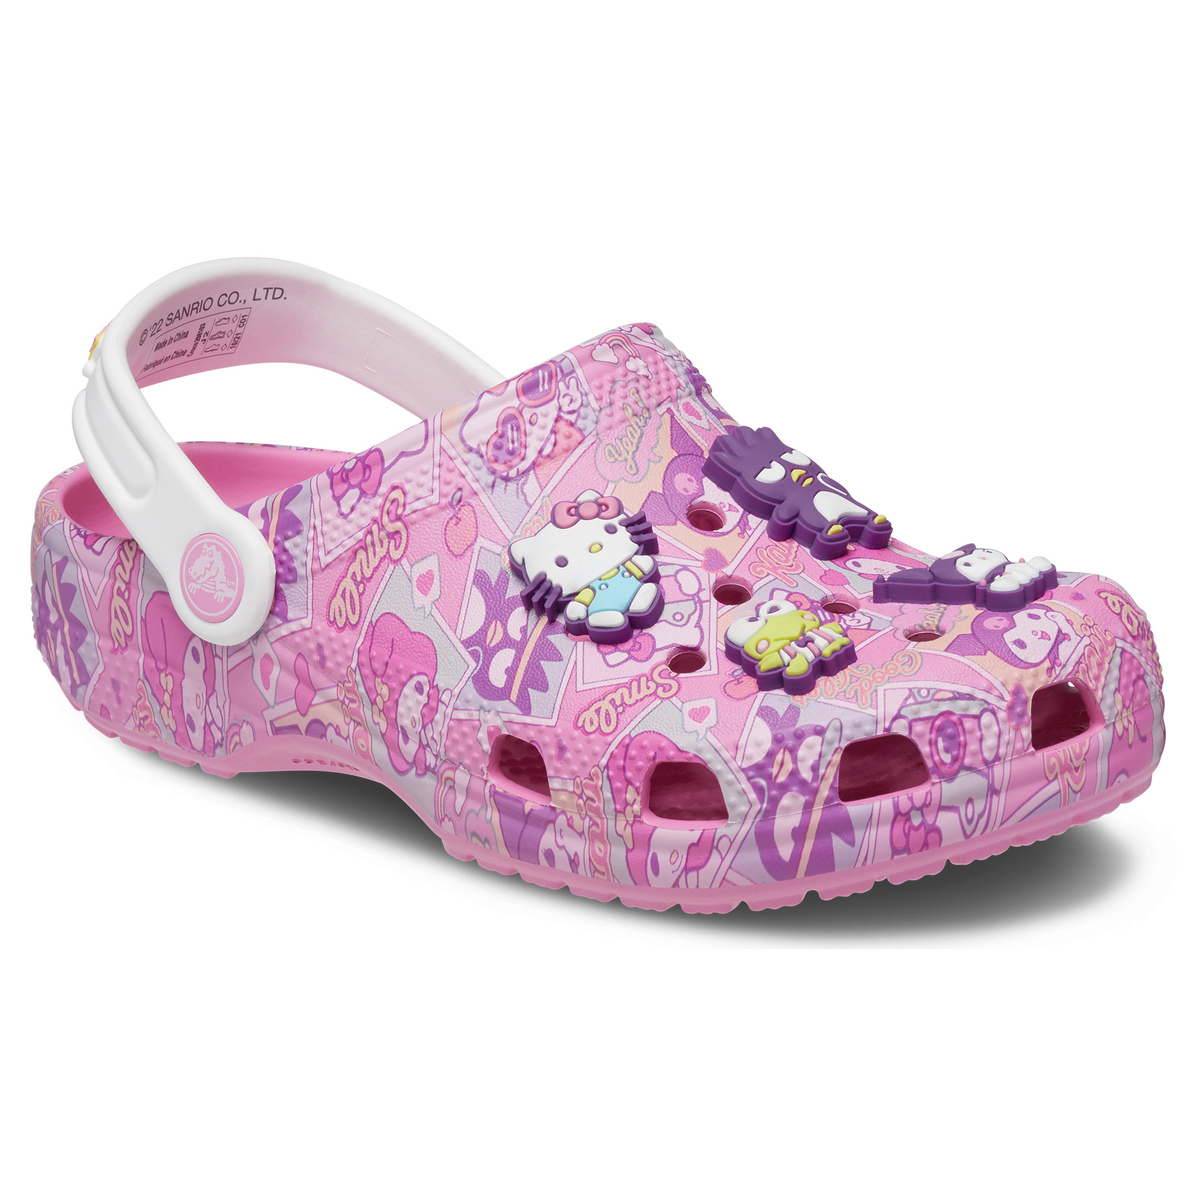 Hello Kitty and Friends x Crocs Adult Classic Clog